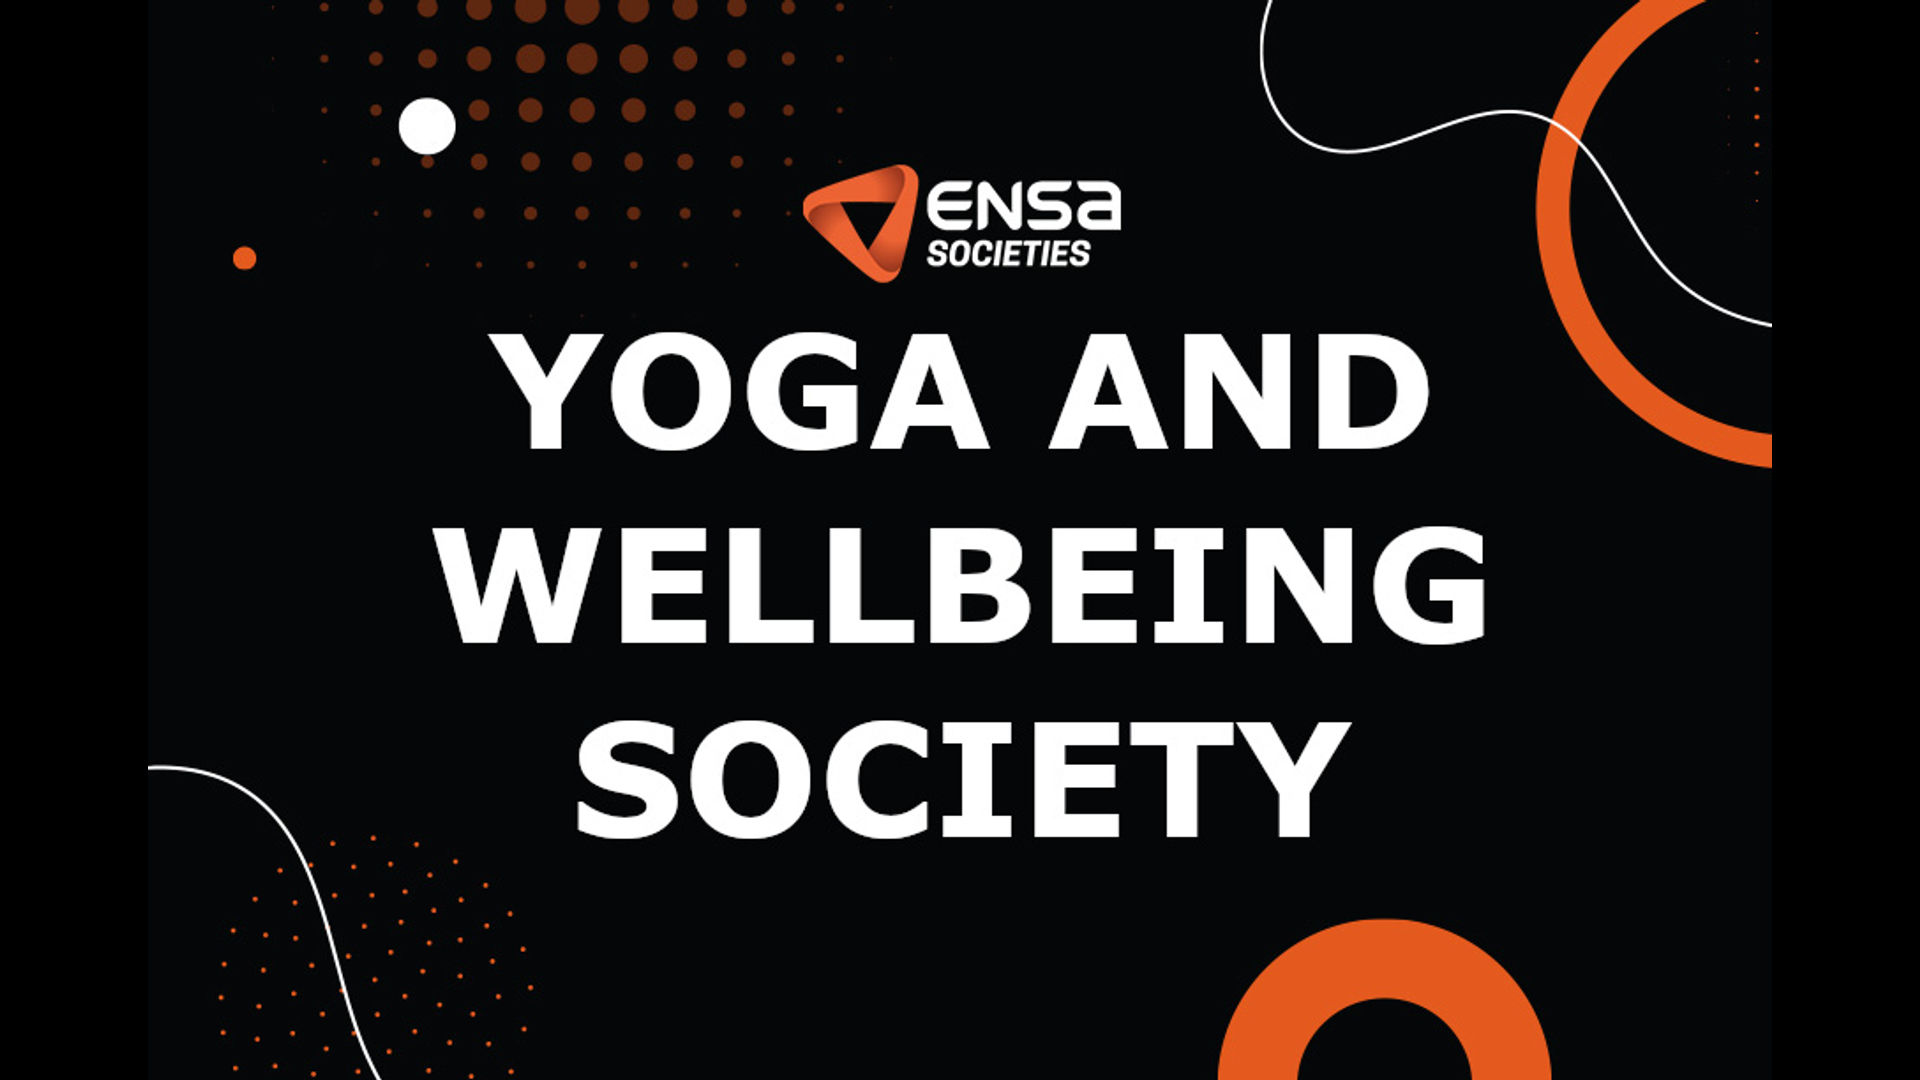 Yoga And Wellbeing Society